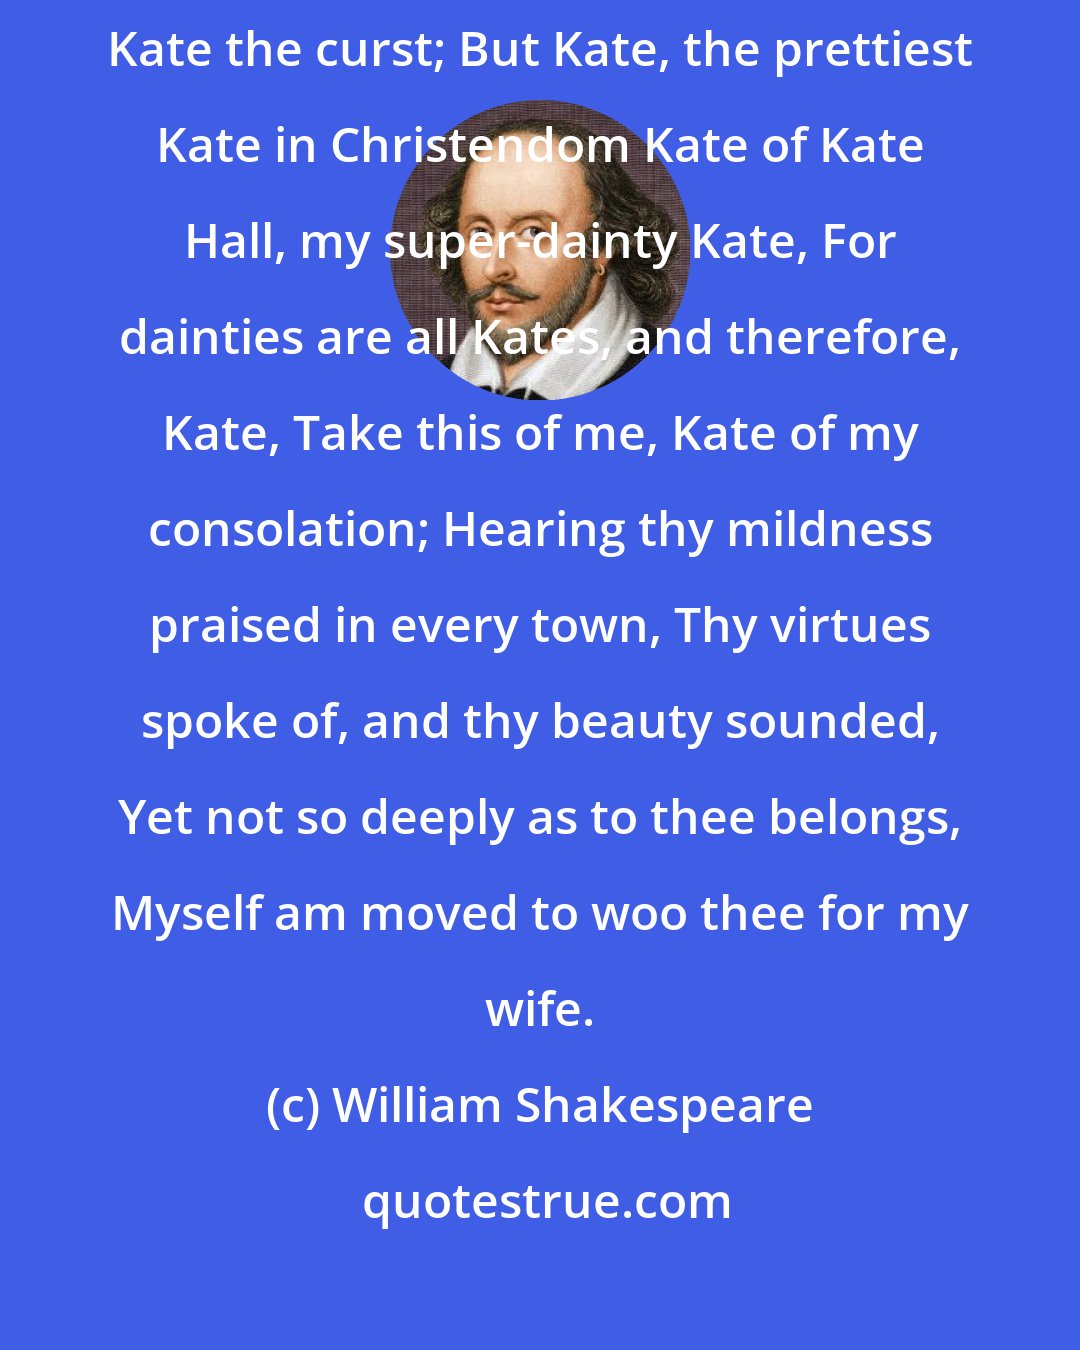 William Shakespeare: You lie, in faith; for you are call'd plain Kate, And bonny Kate and sometimes Kate the curst; But Kate, the prettiest Kate in Christendom Kate of Kate Hall, my super-dainty Kate, For dainties are all Kates, and therefore, Kate, Take this of me, Kate of my consolation; Hearing thy mildness praised in every town, Thy virtues spoke of, and thy beauty sounded, Yet not so deeply as to thee belongs, Myself am moved to woo thee for my wife.